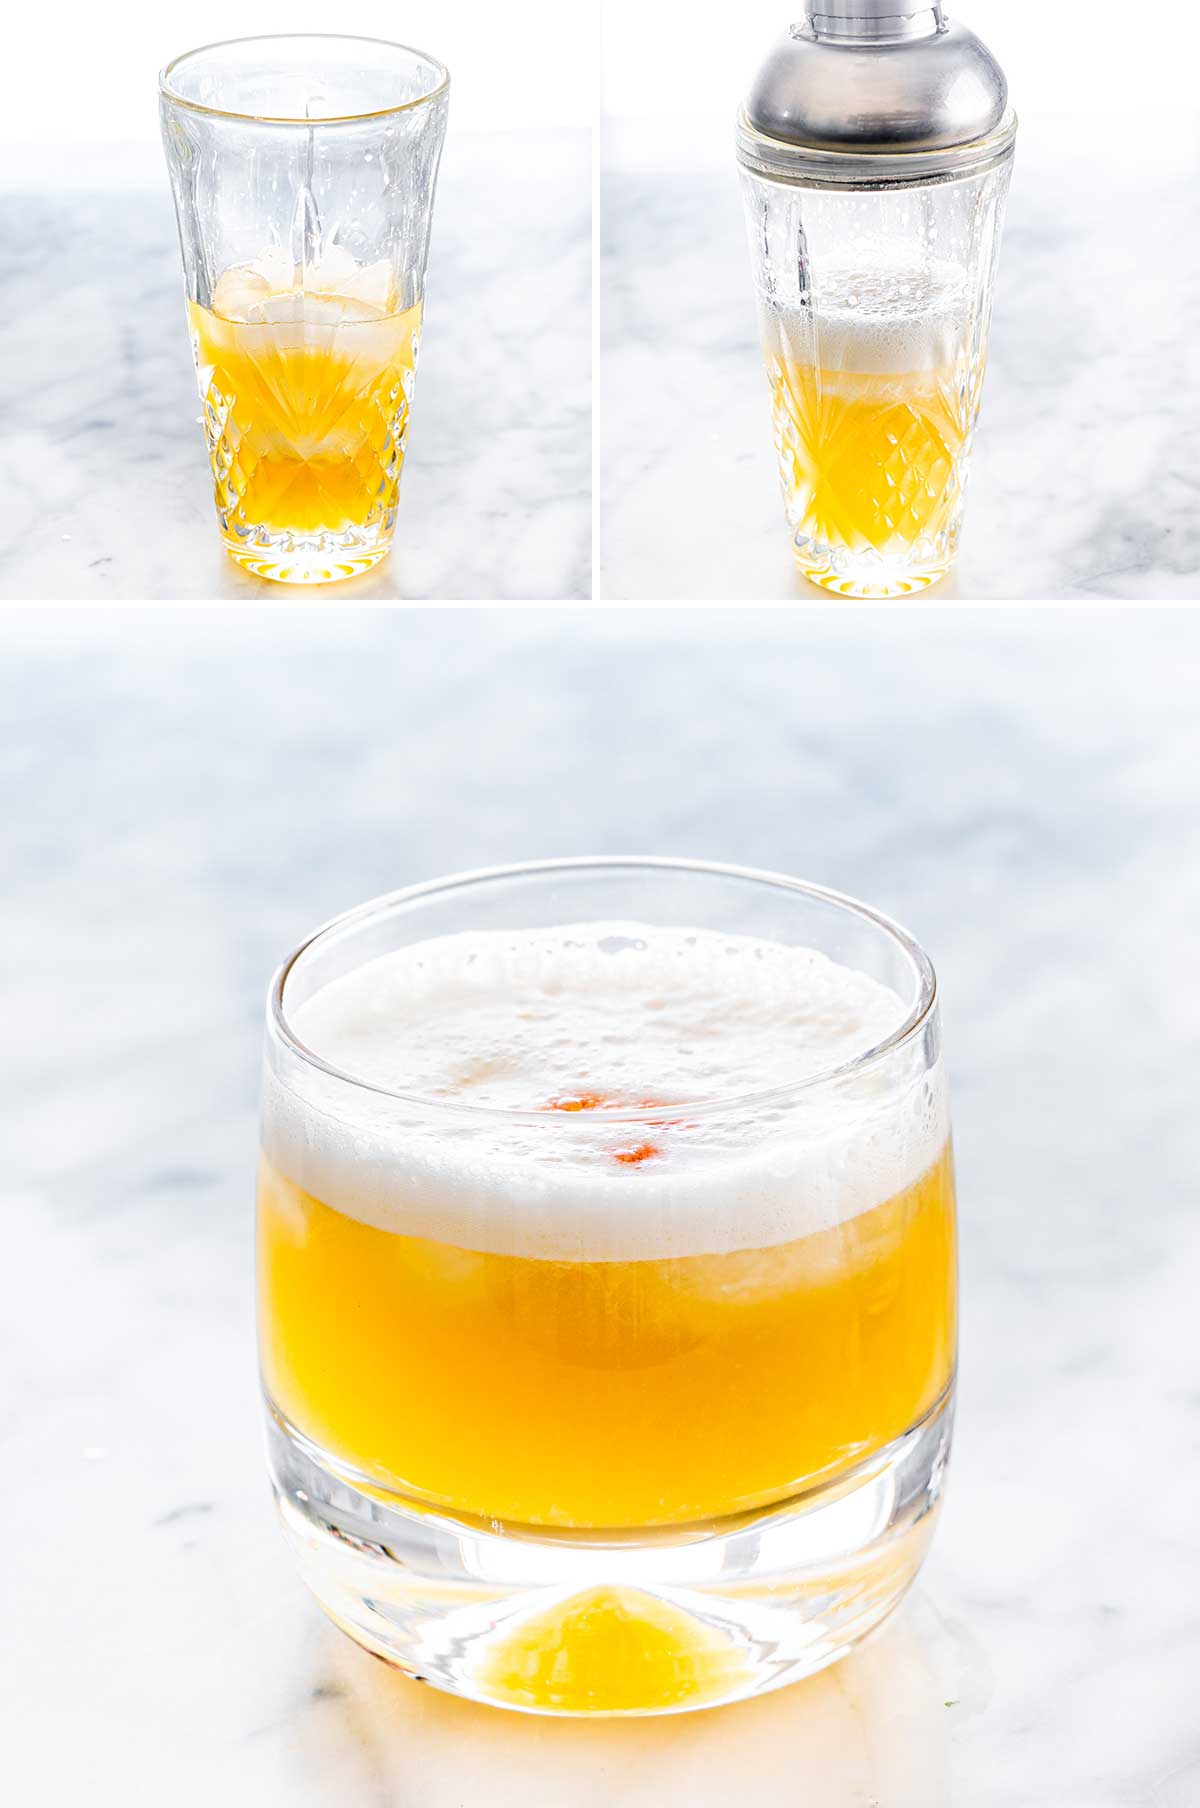 process shots showing how to make a whiskey sour